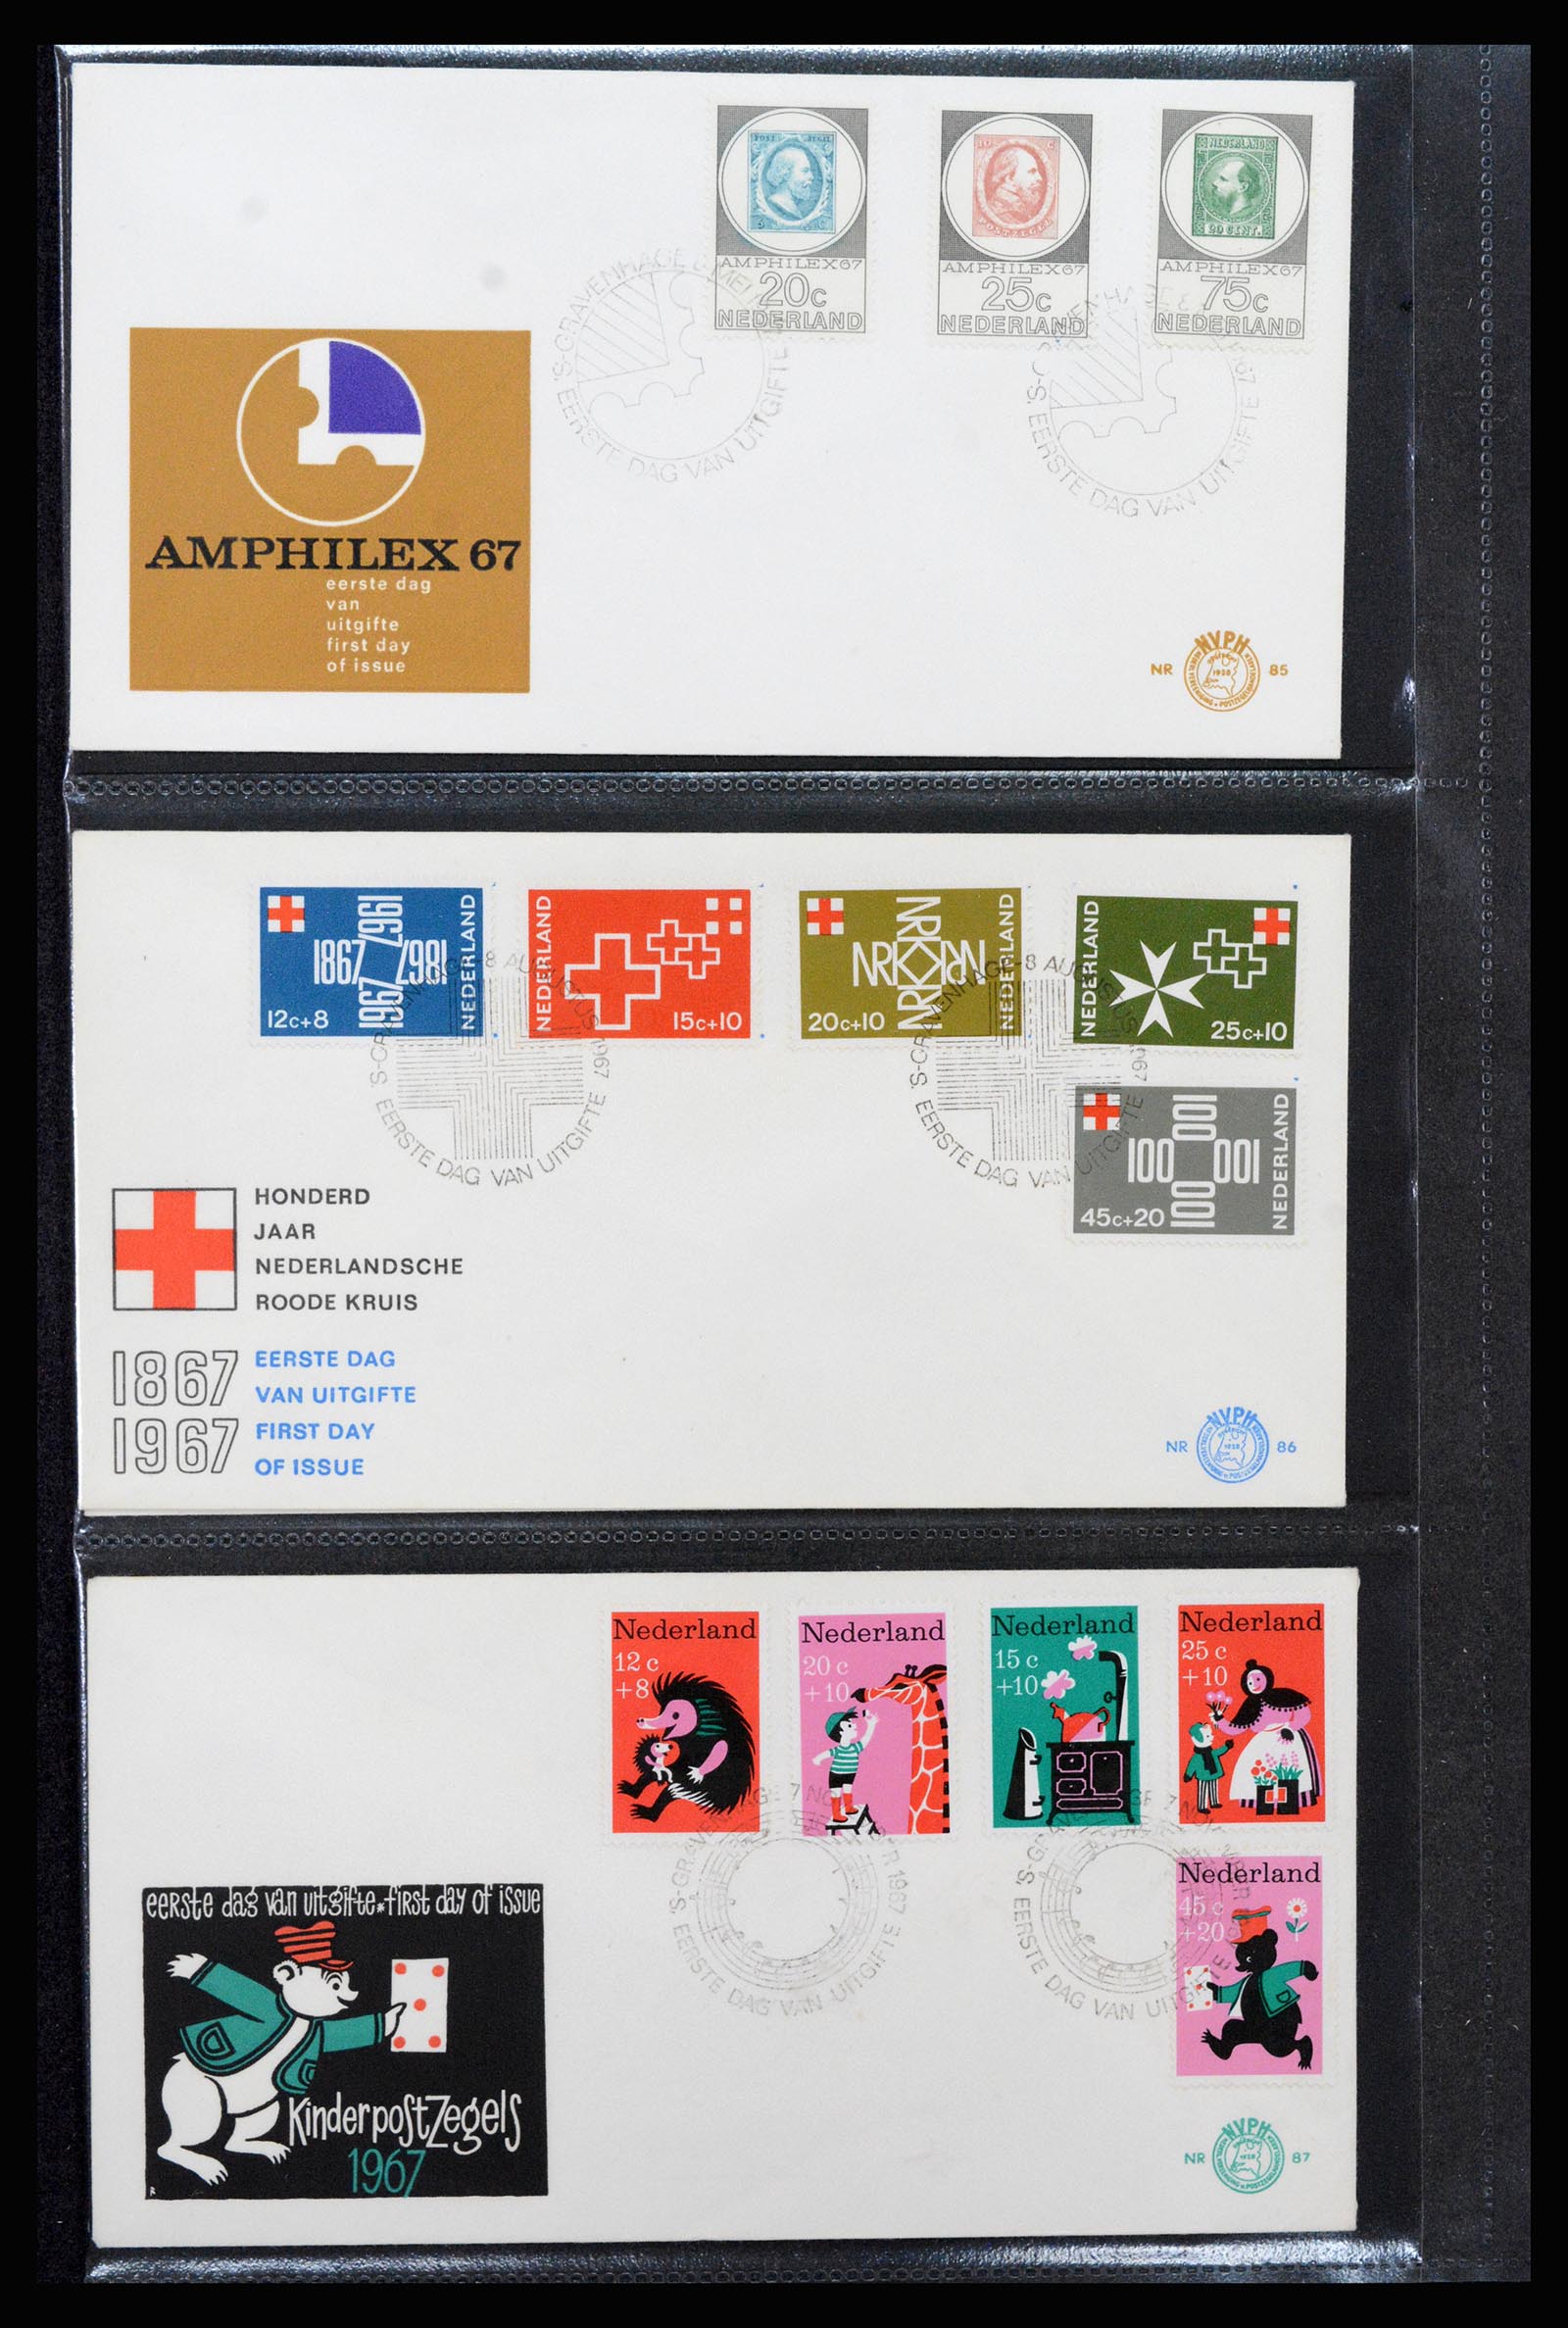 37264 029 - Stamp collection 37264 Netherlands FDC's 1950-1975.